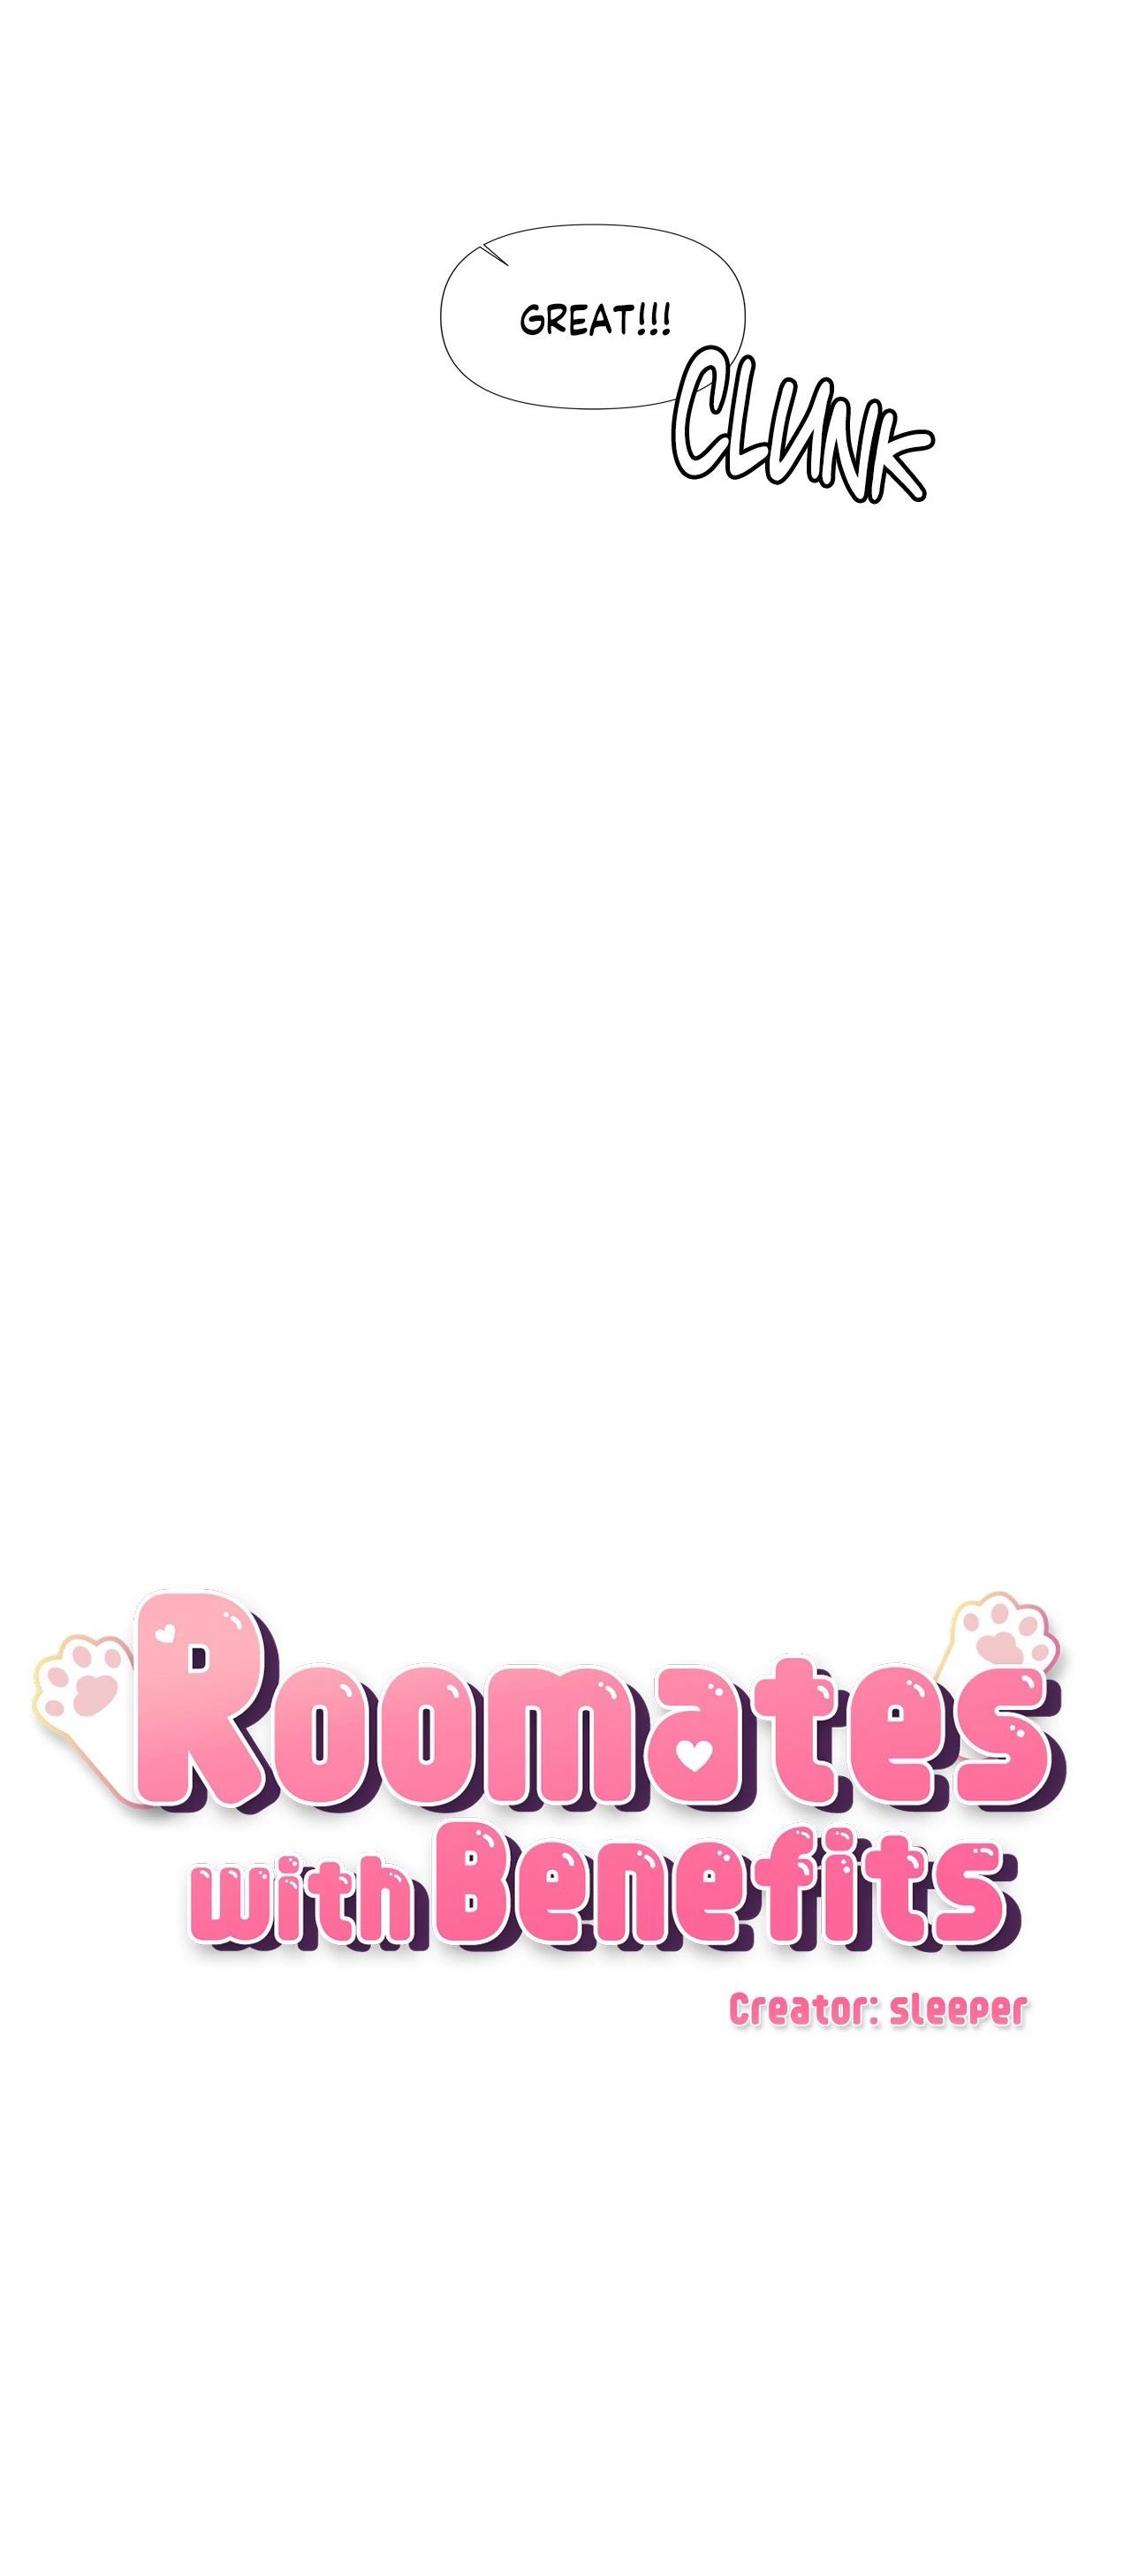 Roommates with benefits image